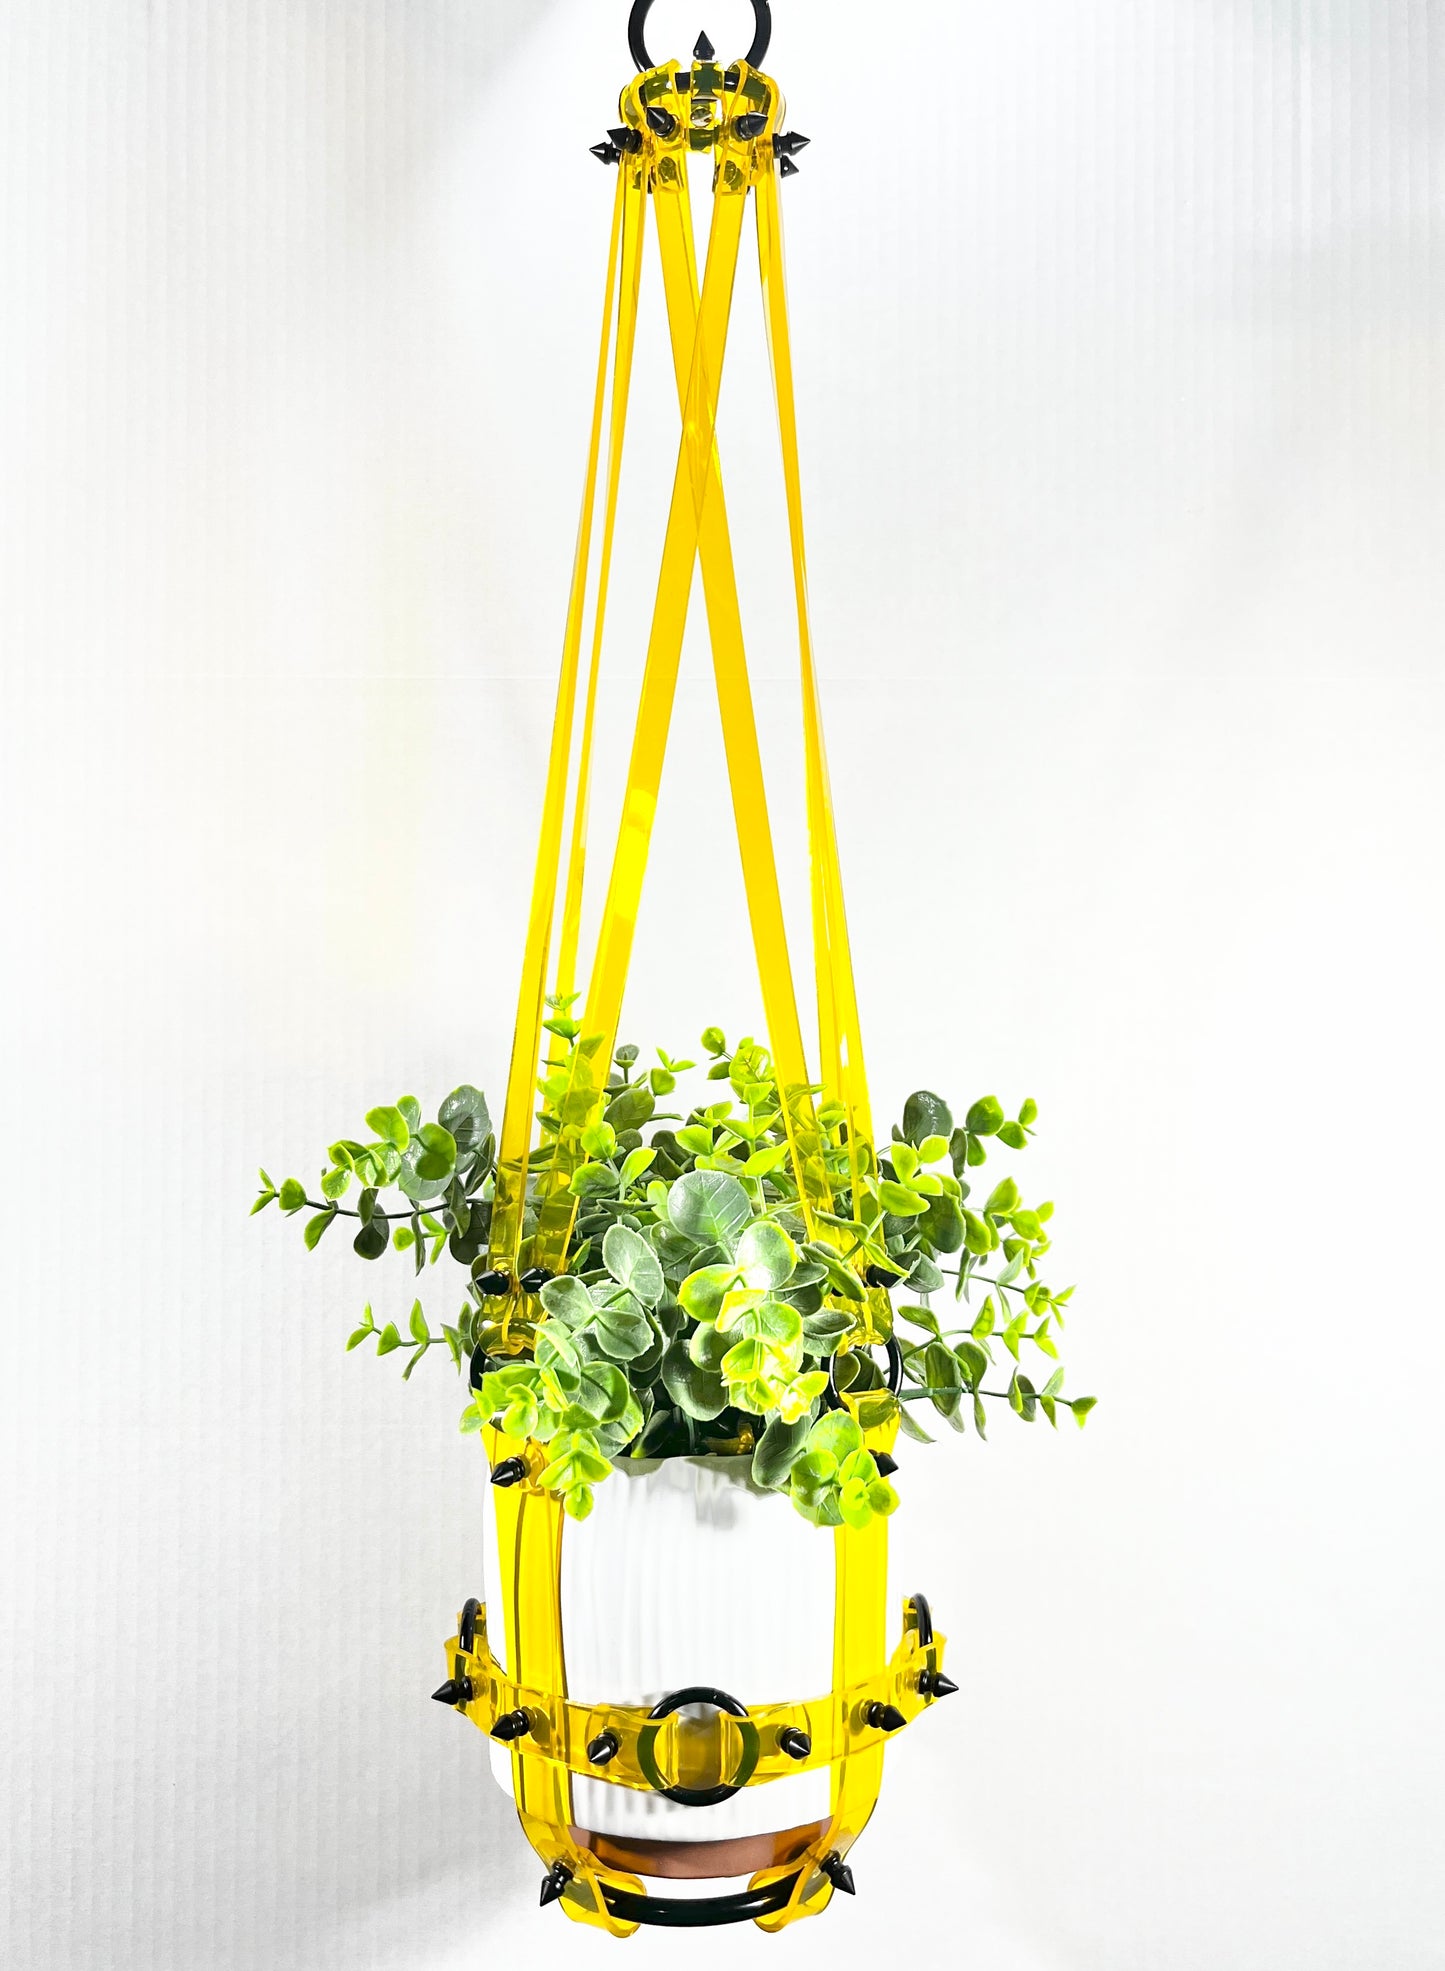 Basic Bitch 6" Plant Hanger in Clear Yellow